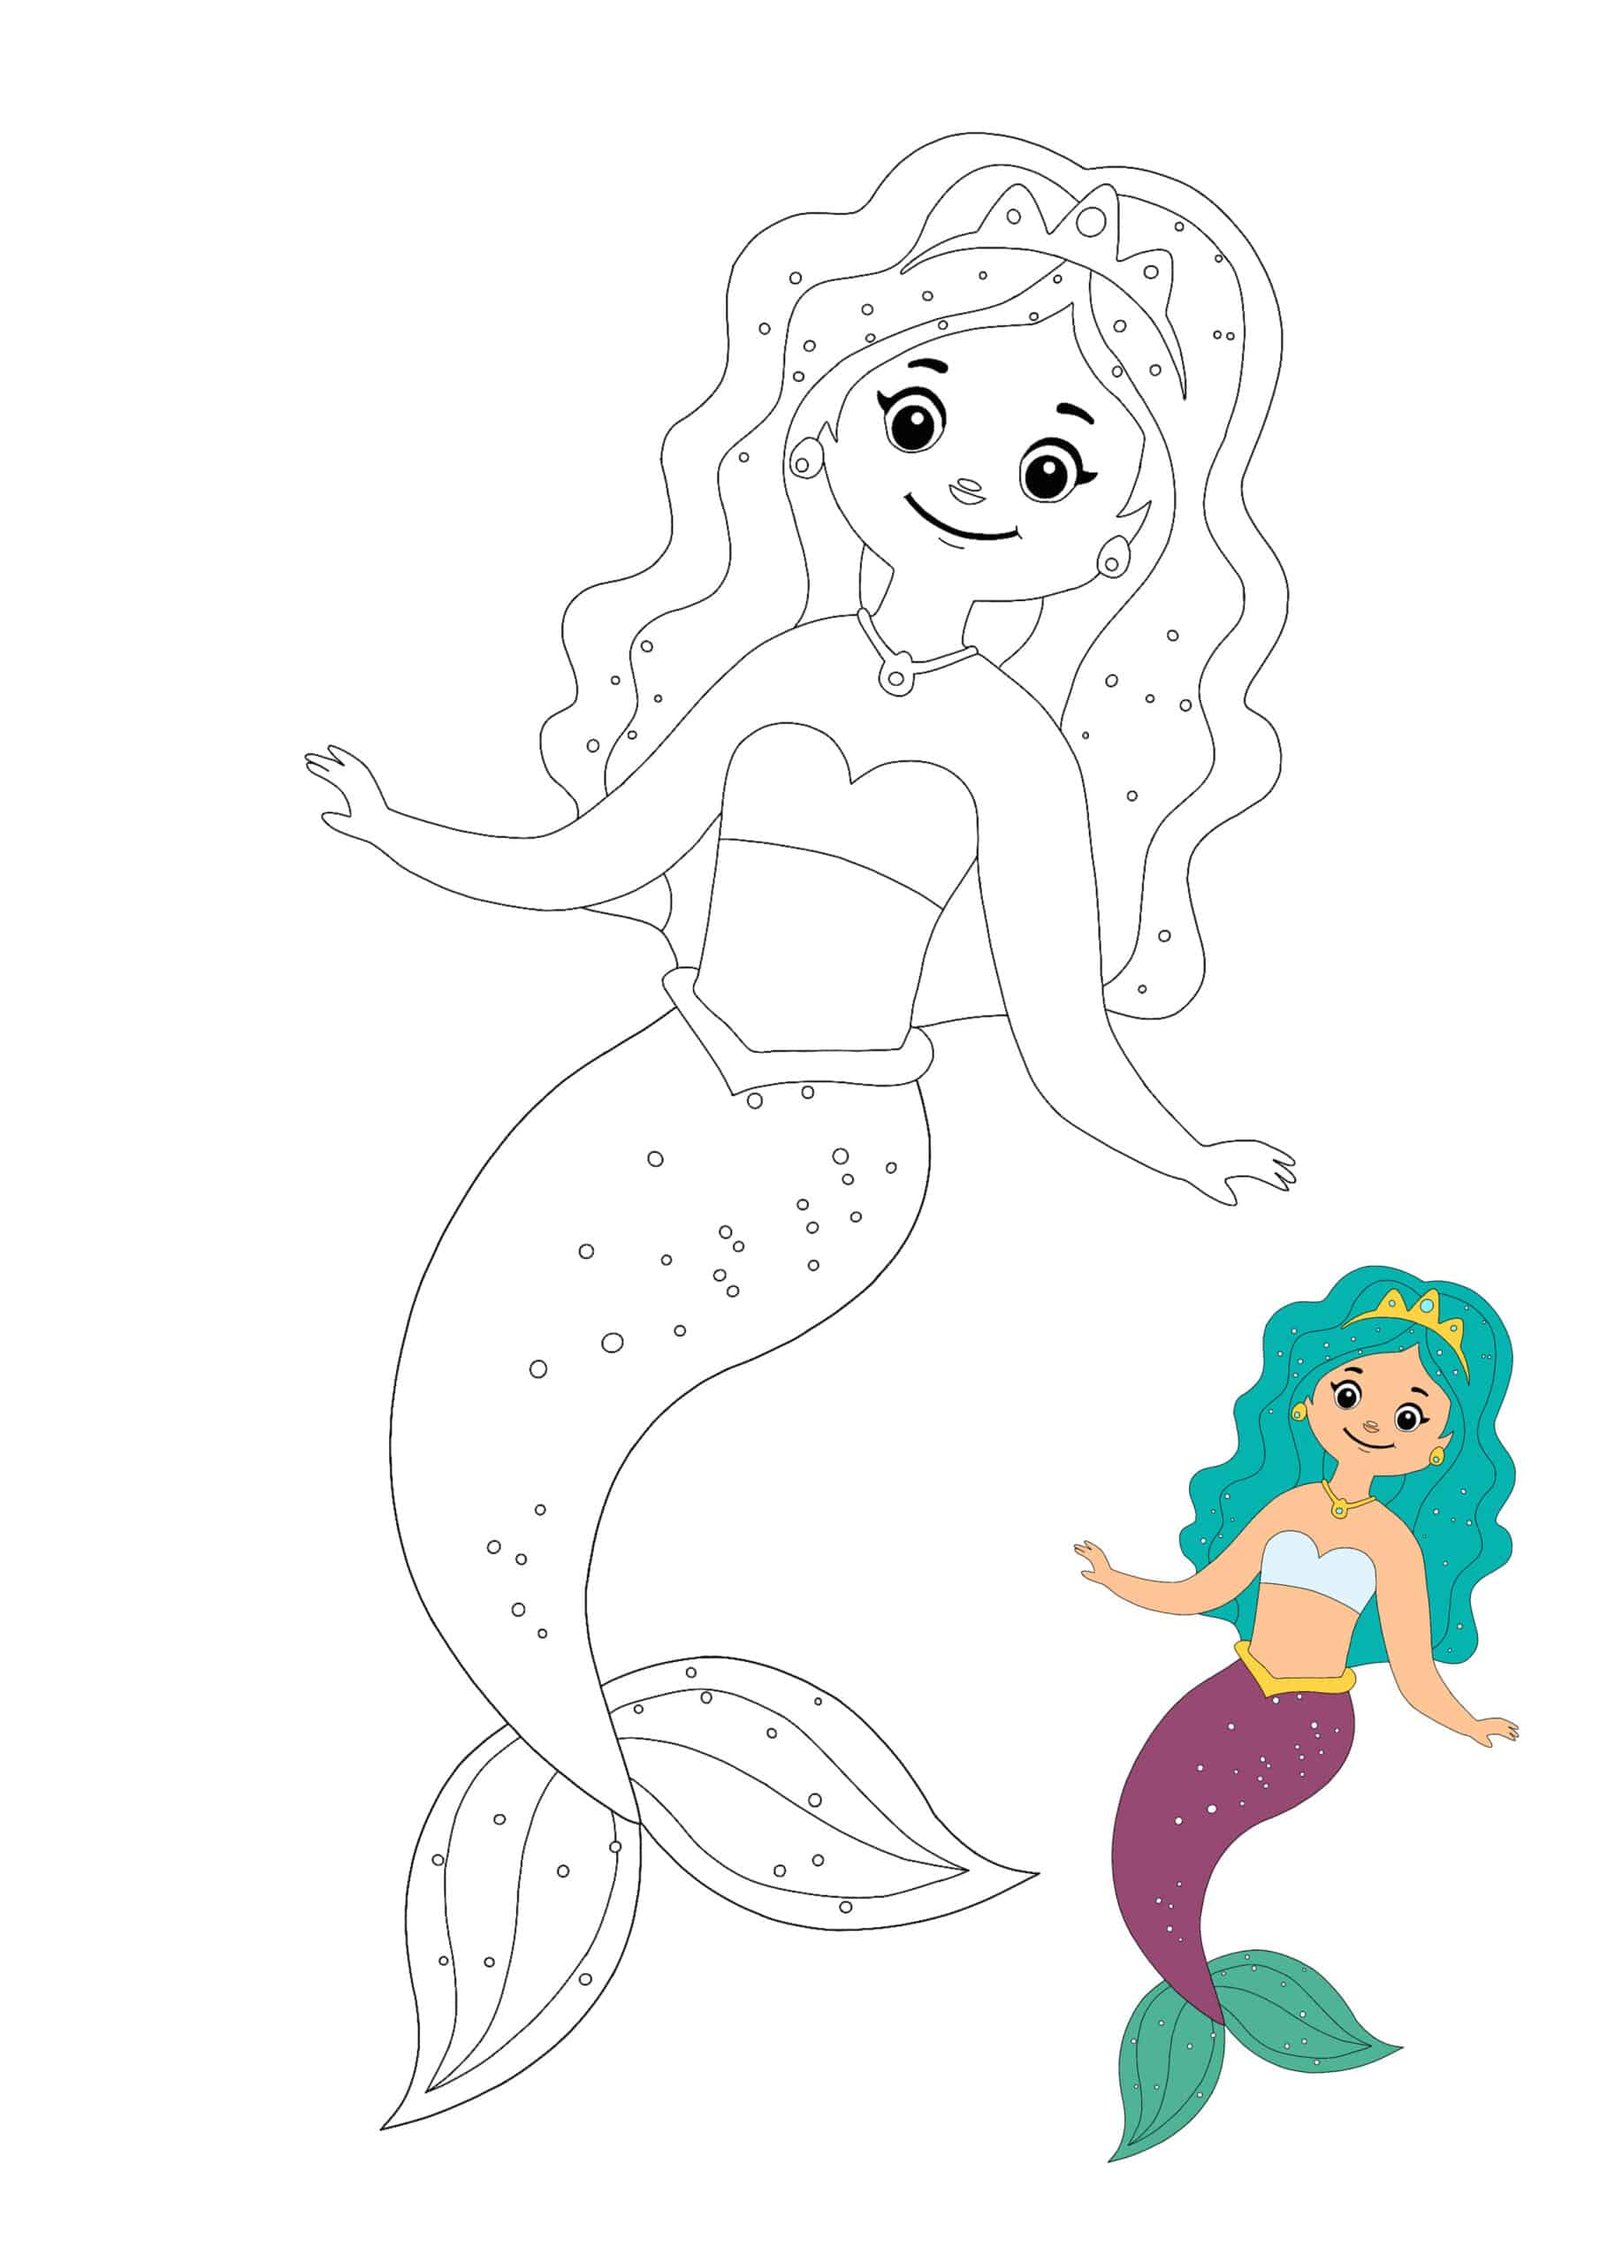 Mermaid Princess with Crown colouring page